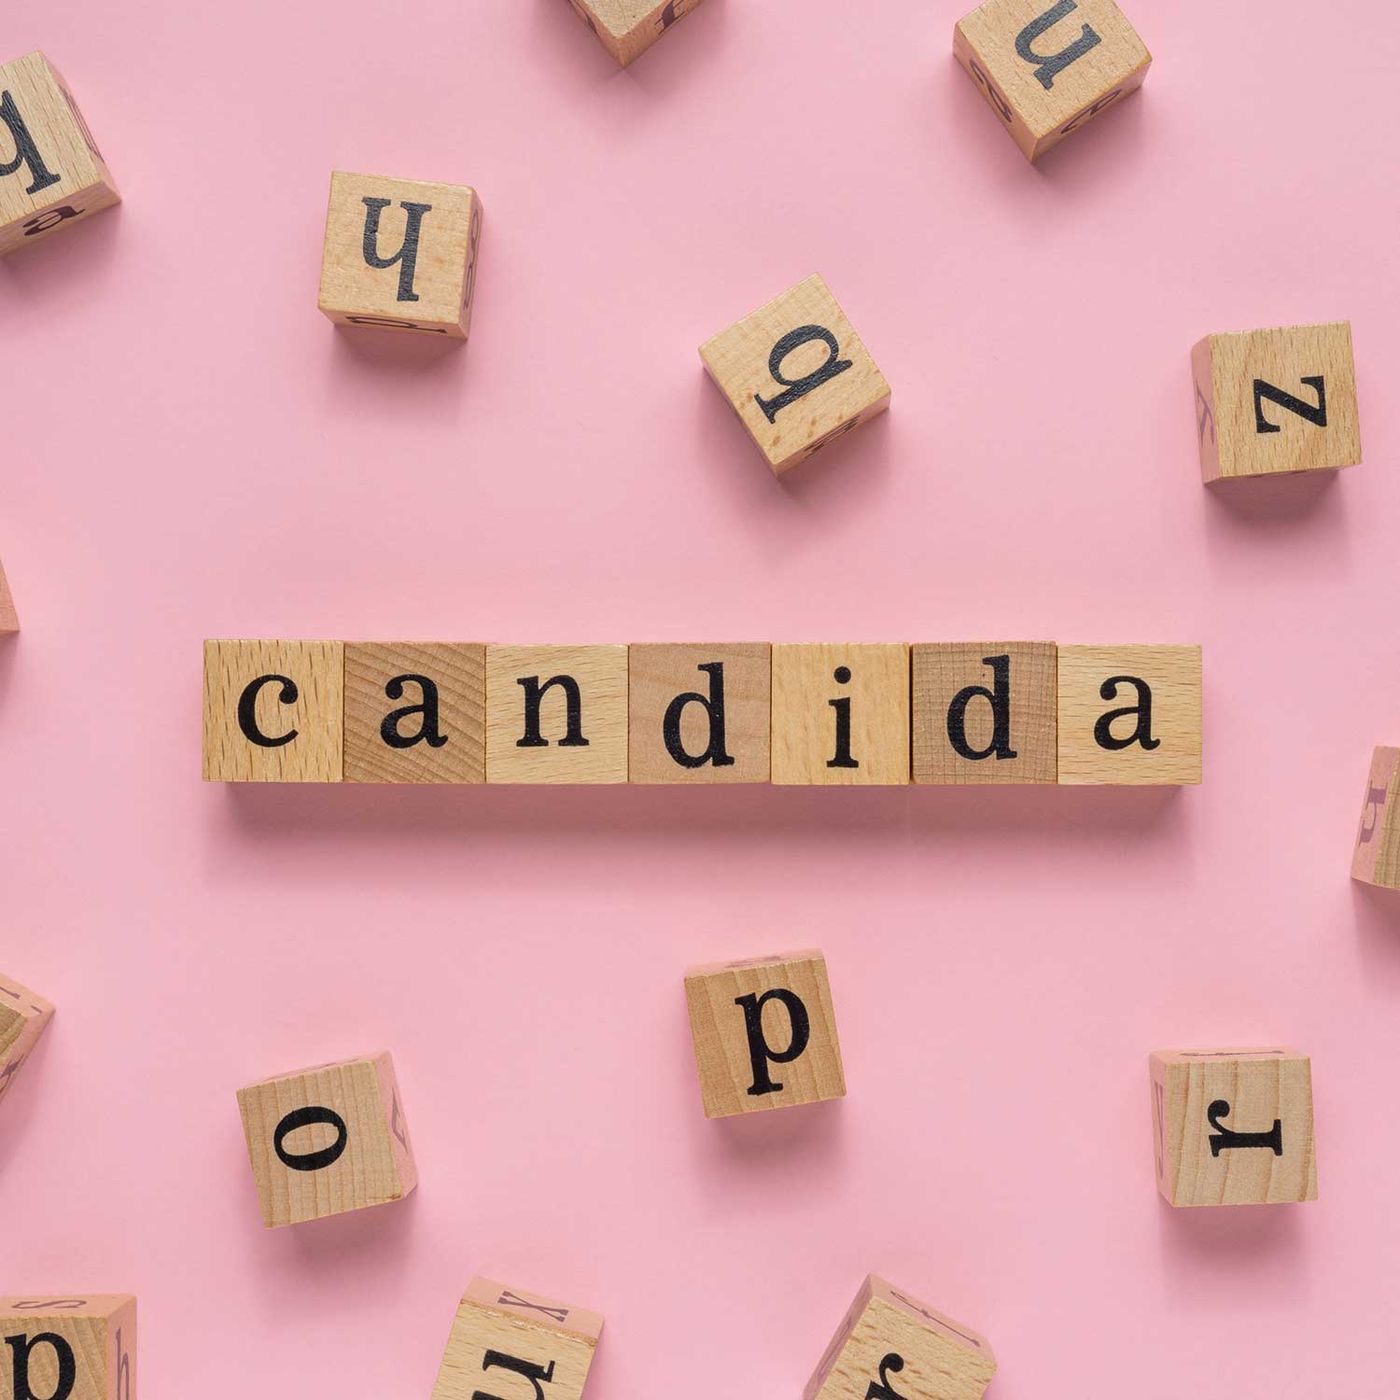 Candida Vaginale: cause, sintomi e cure